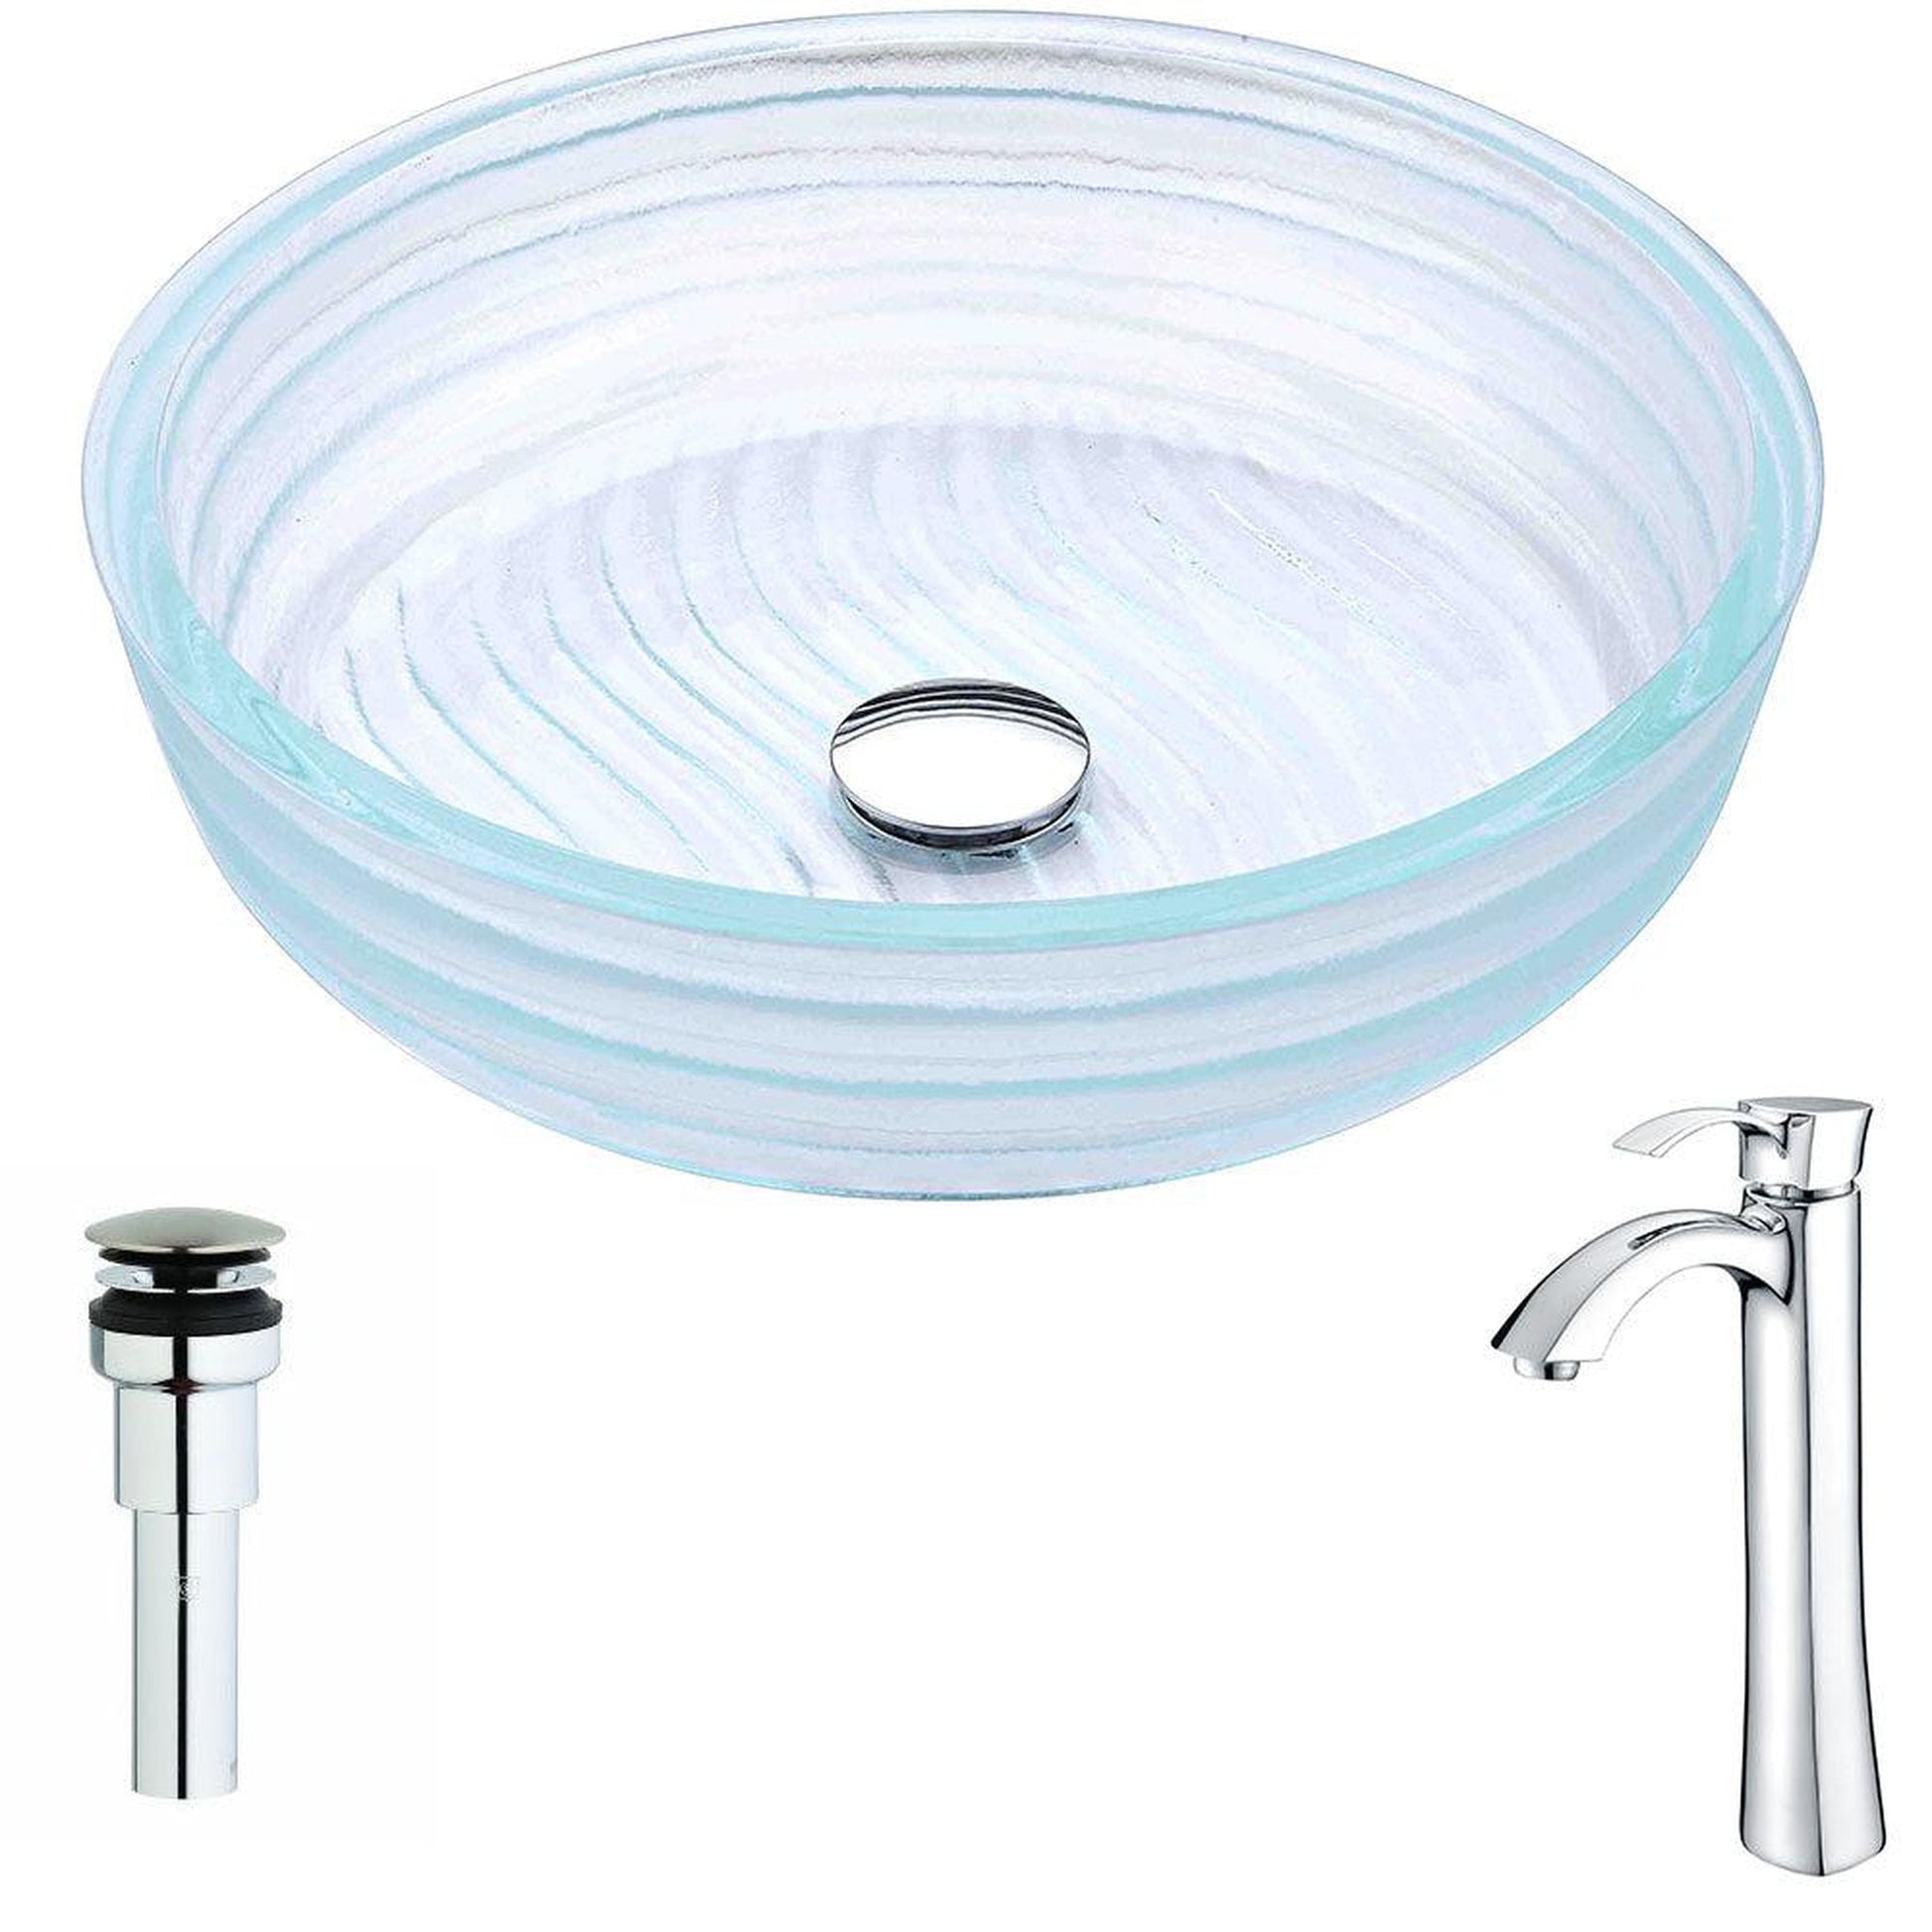 ANZZI Canta Series 17" x 17" Cylinder Shape Translucent Crystal Deco-Glass Vessel Sink With Chrome Pop-Up Drain and Harmony Faucet